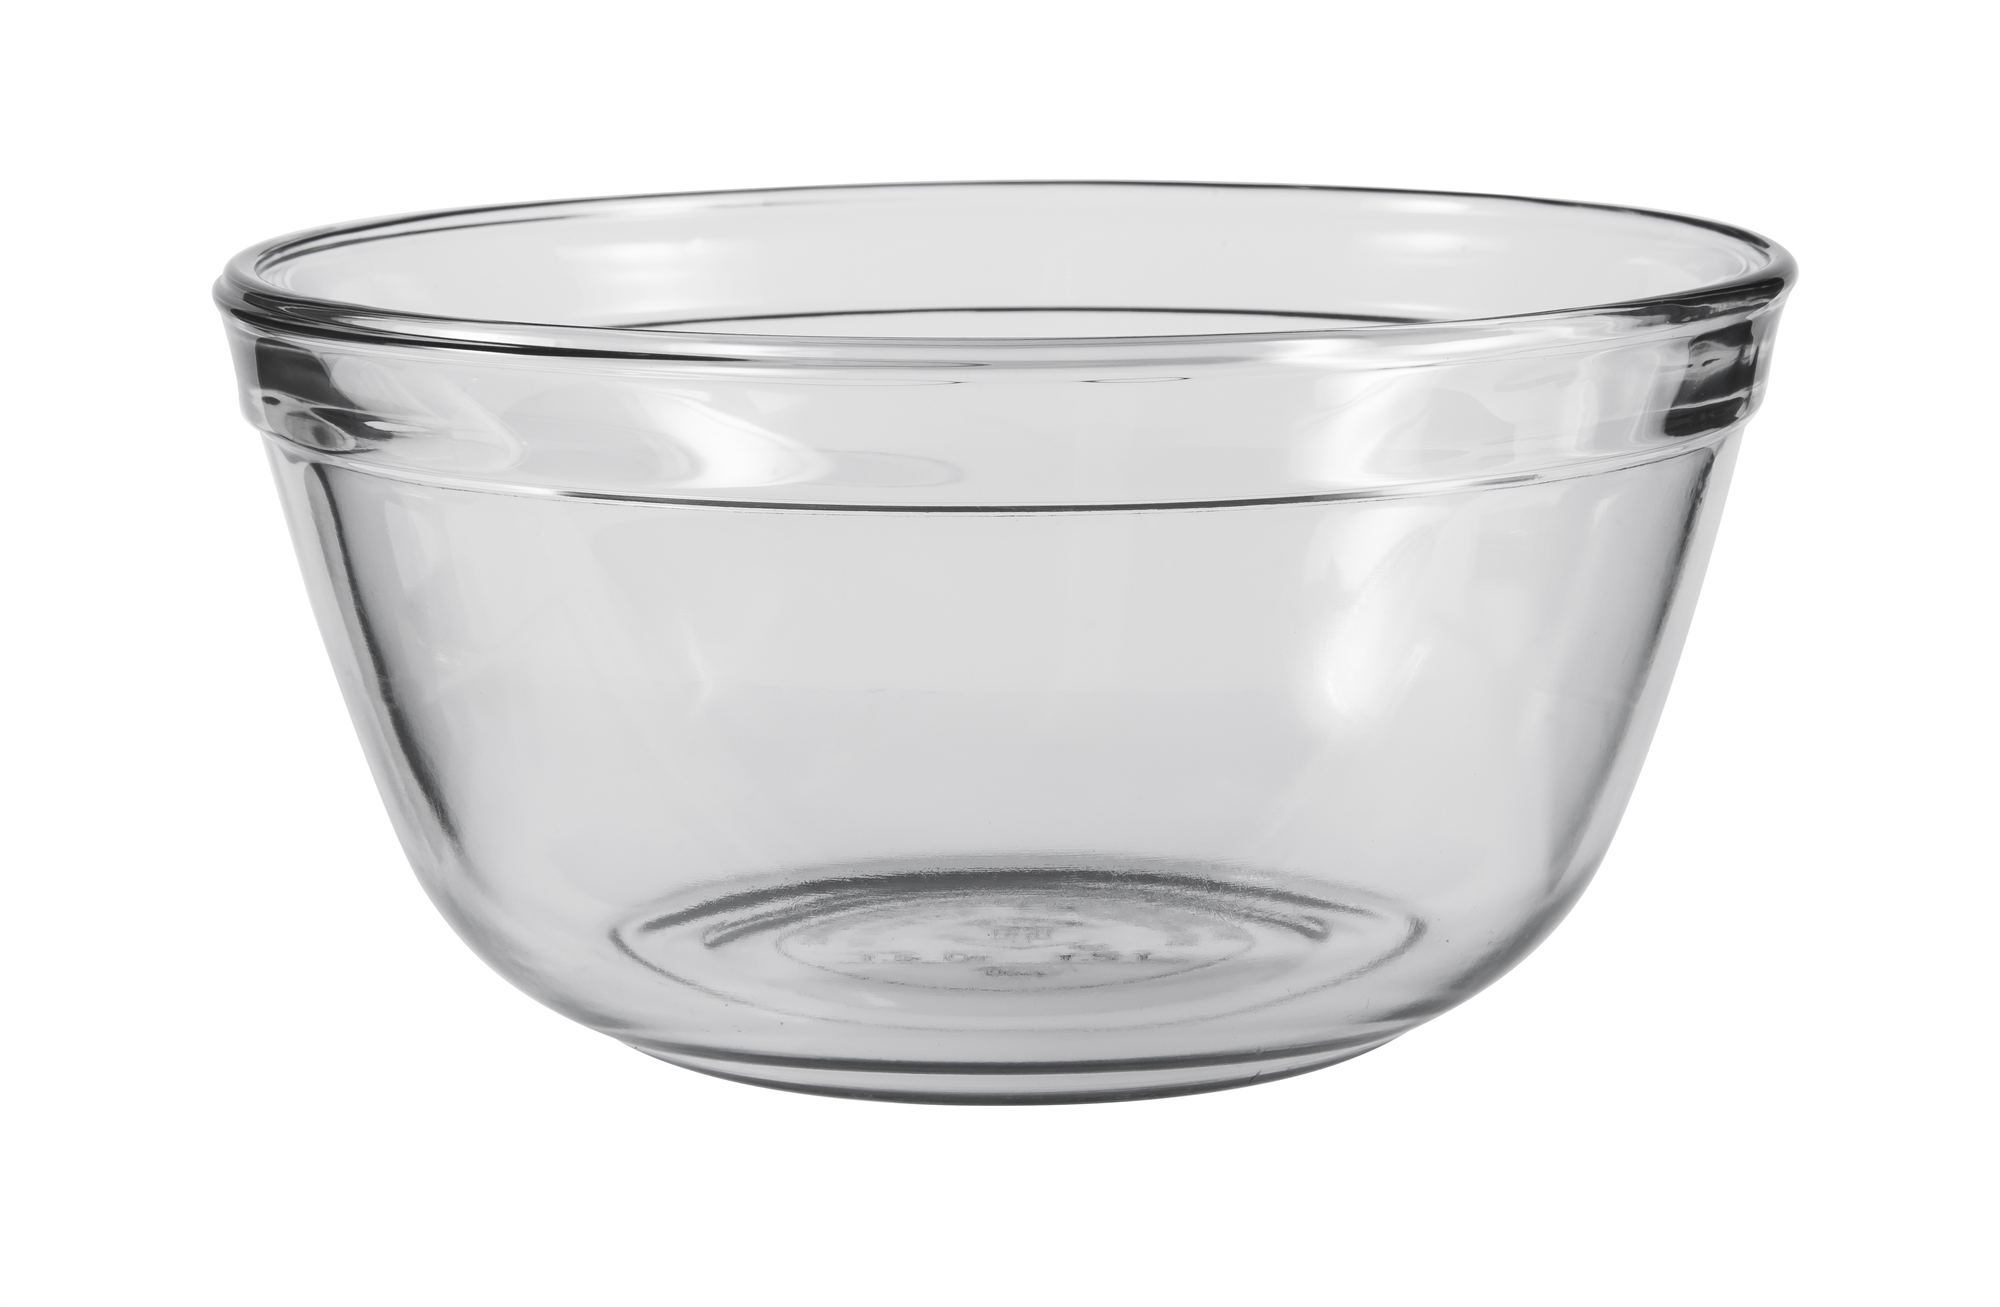 Buy the Anchor Hocking Glass Mixing Bowl 2.5 Litre online at smithsofloughton.com